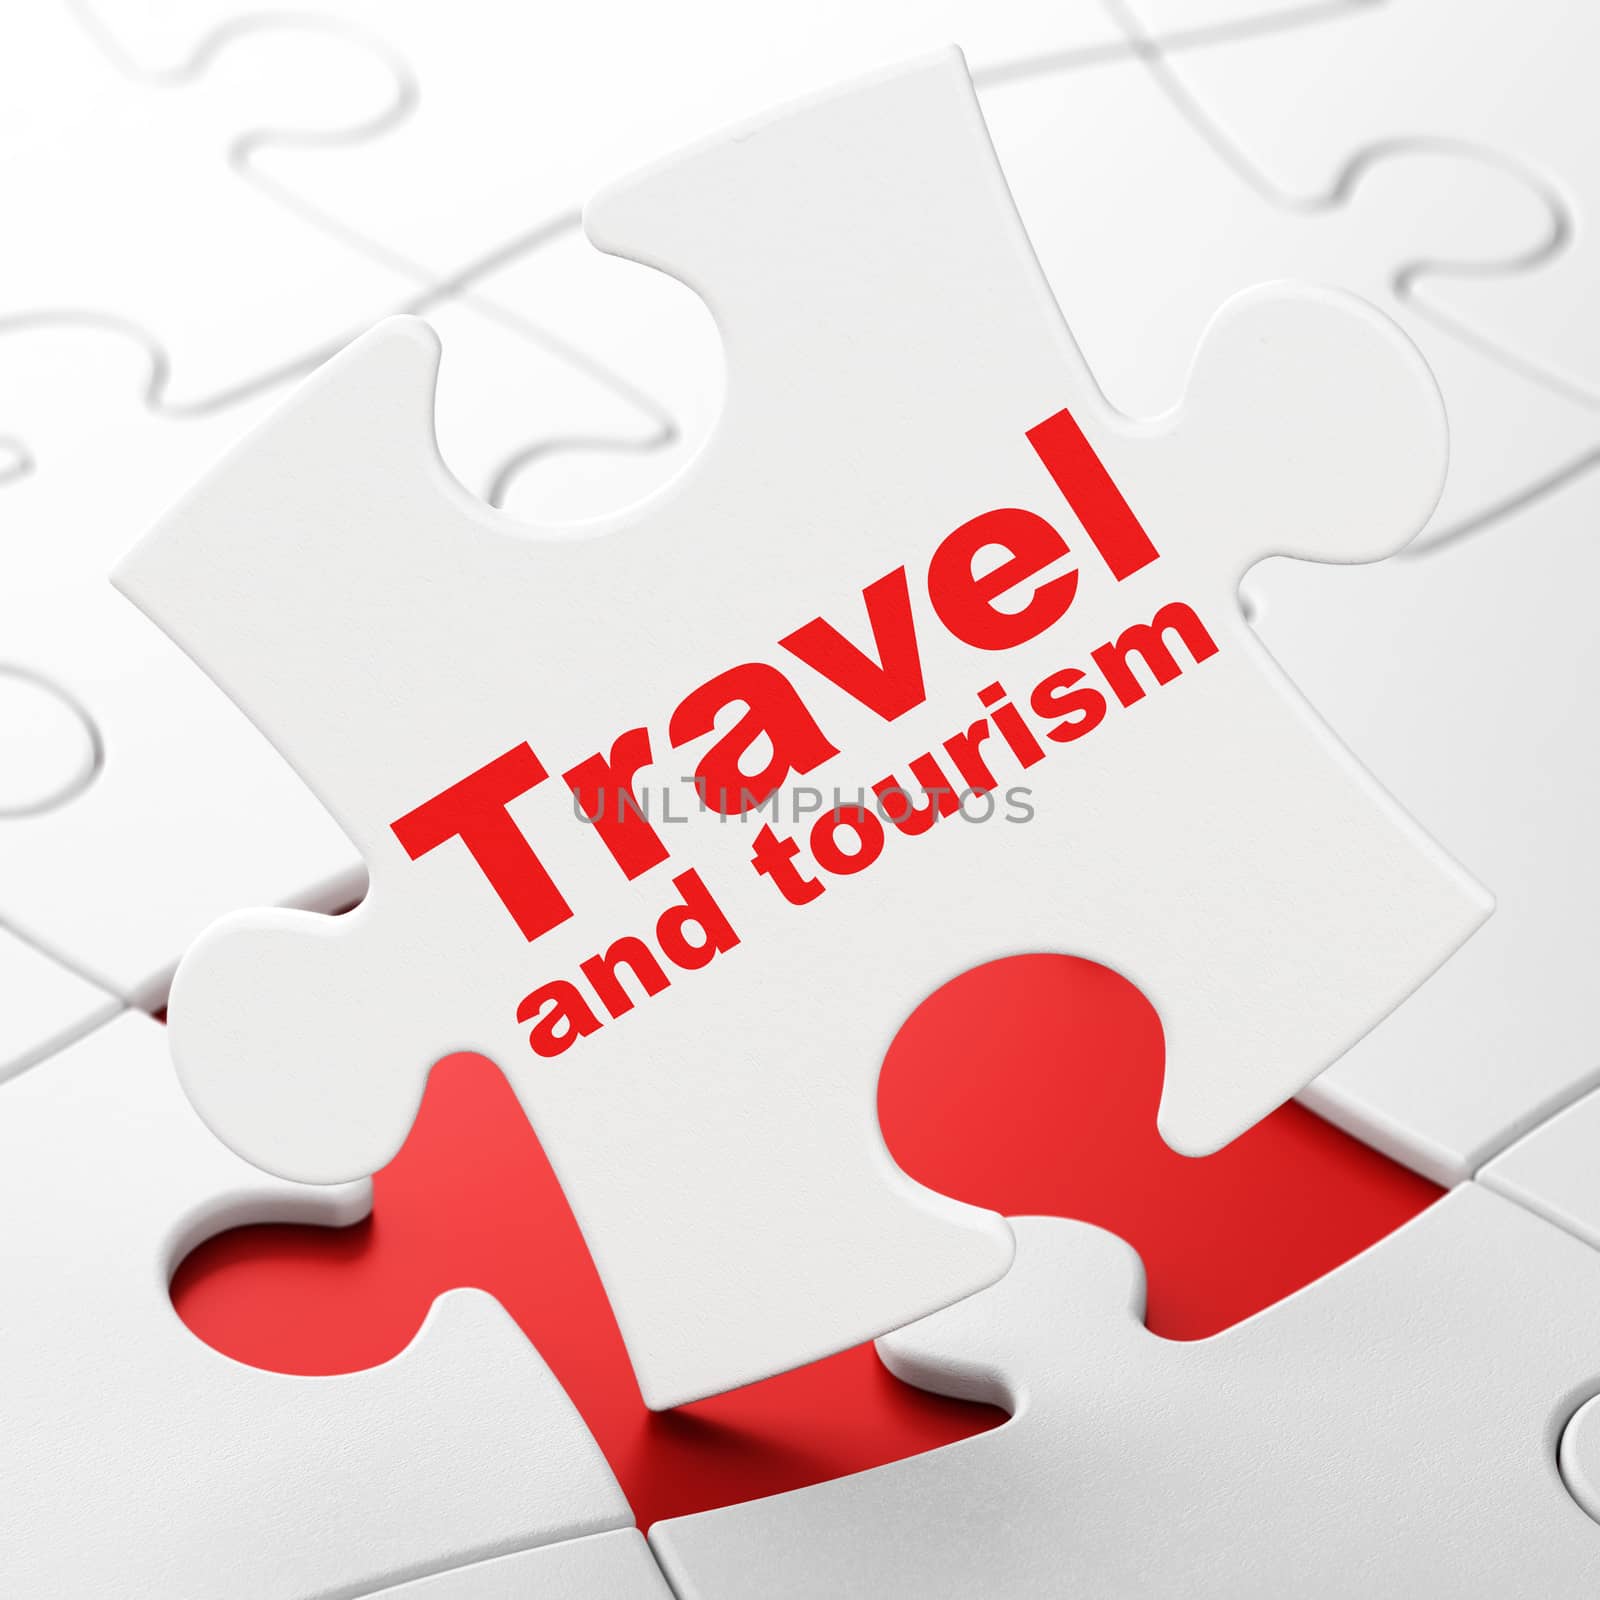 Vacation concept: Travel And Tourism on White puzzle pieces background, 3D rendering